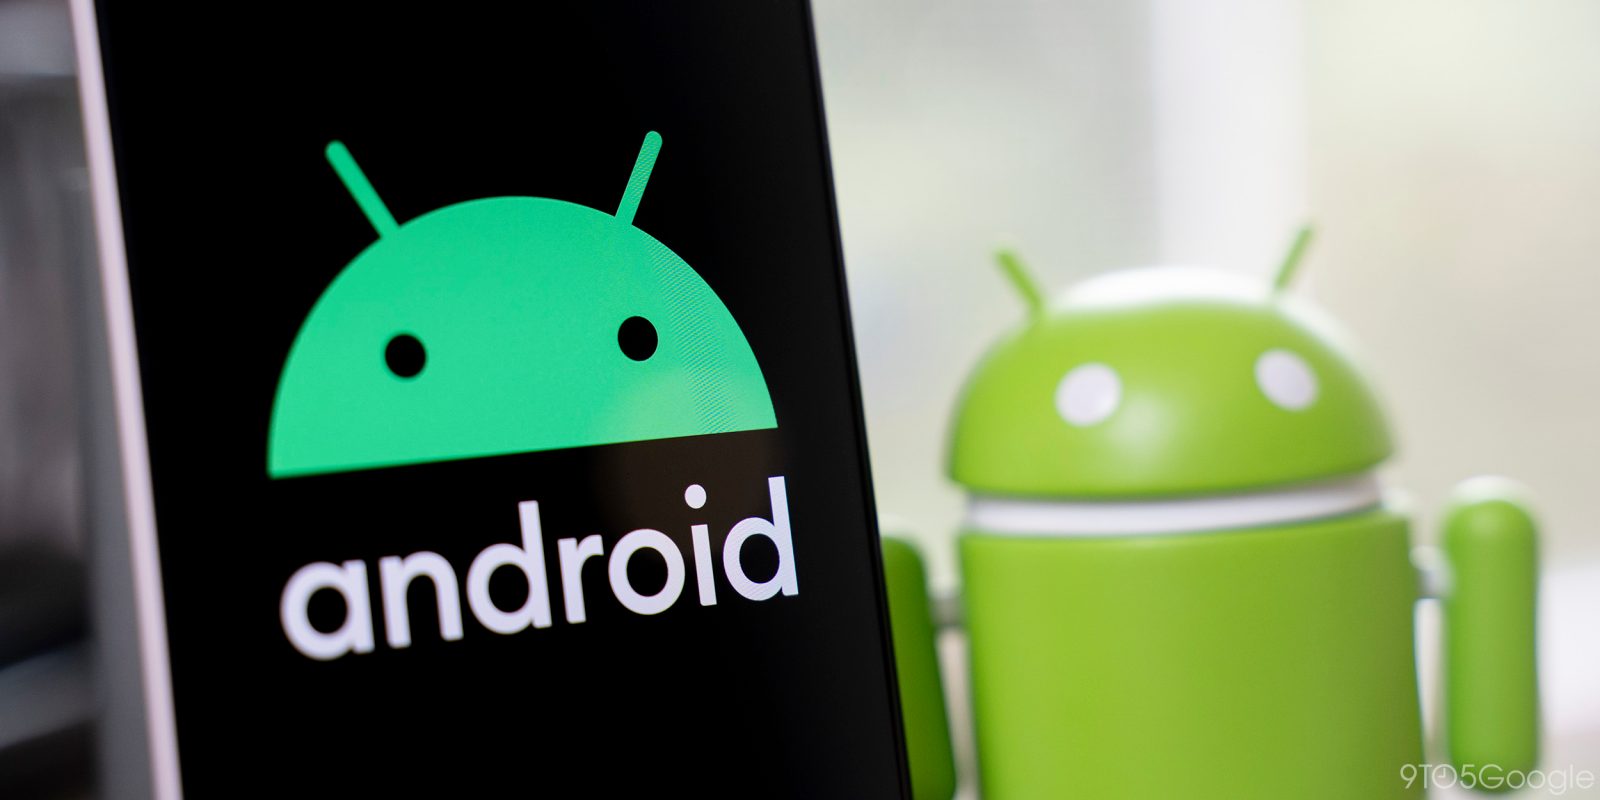 Android_2019_logo_2